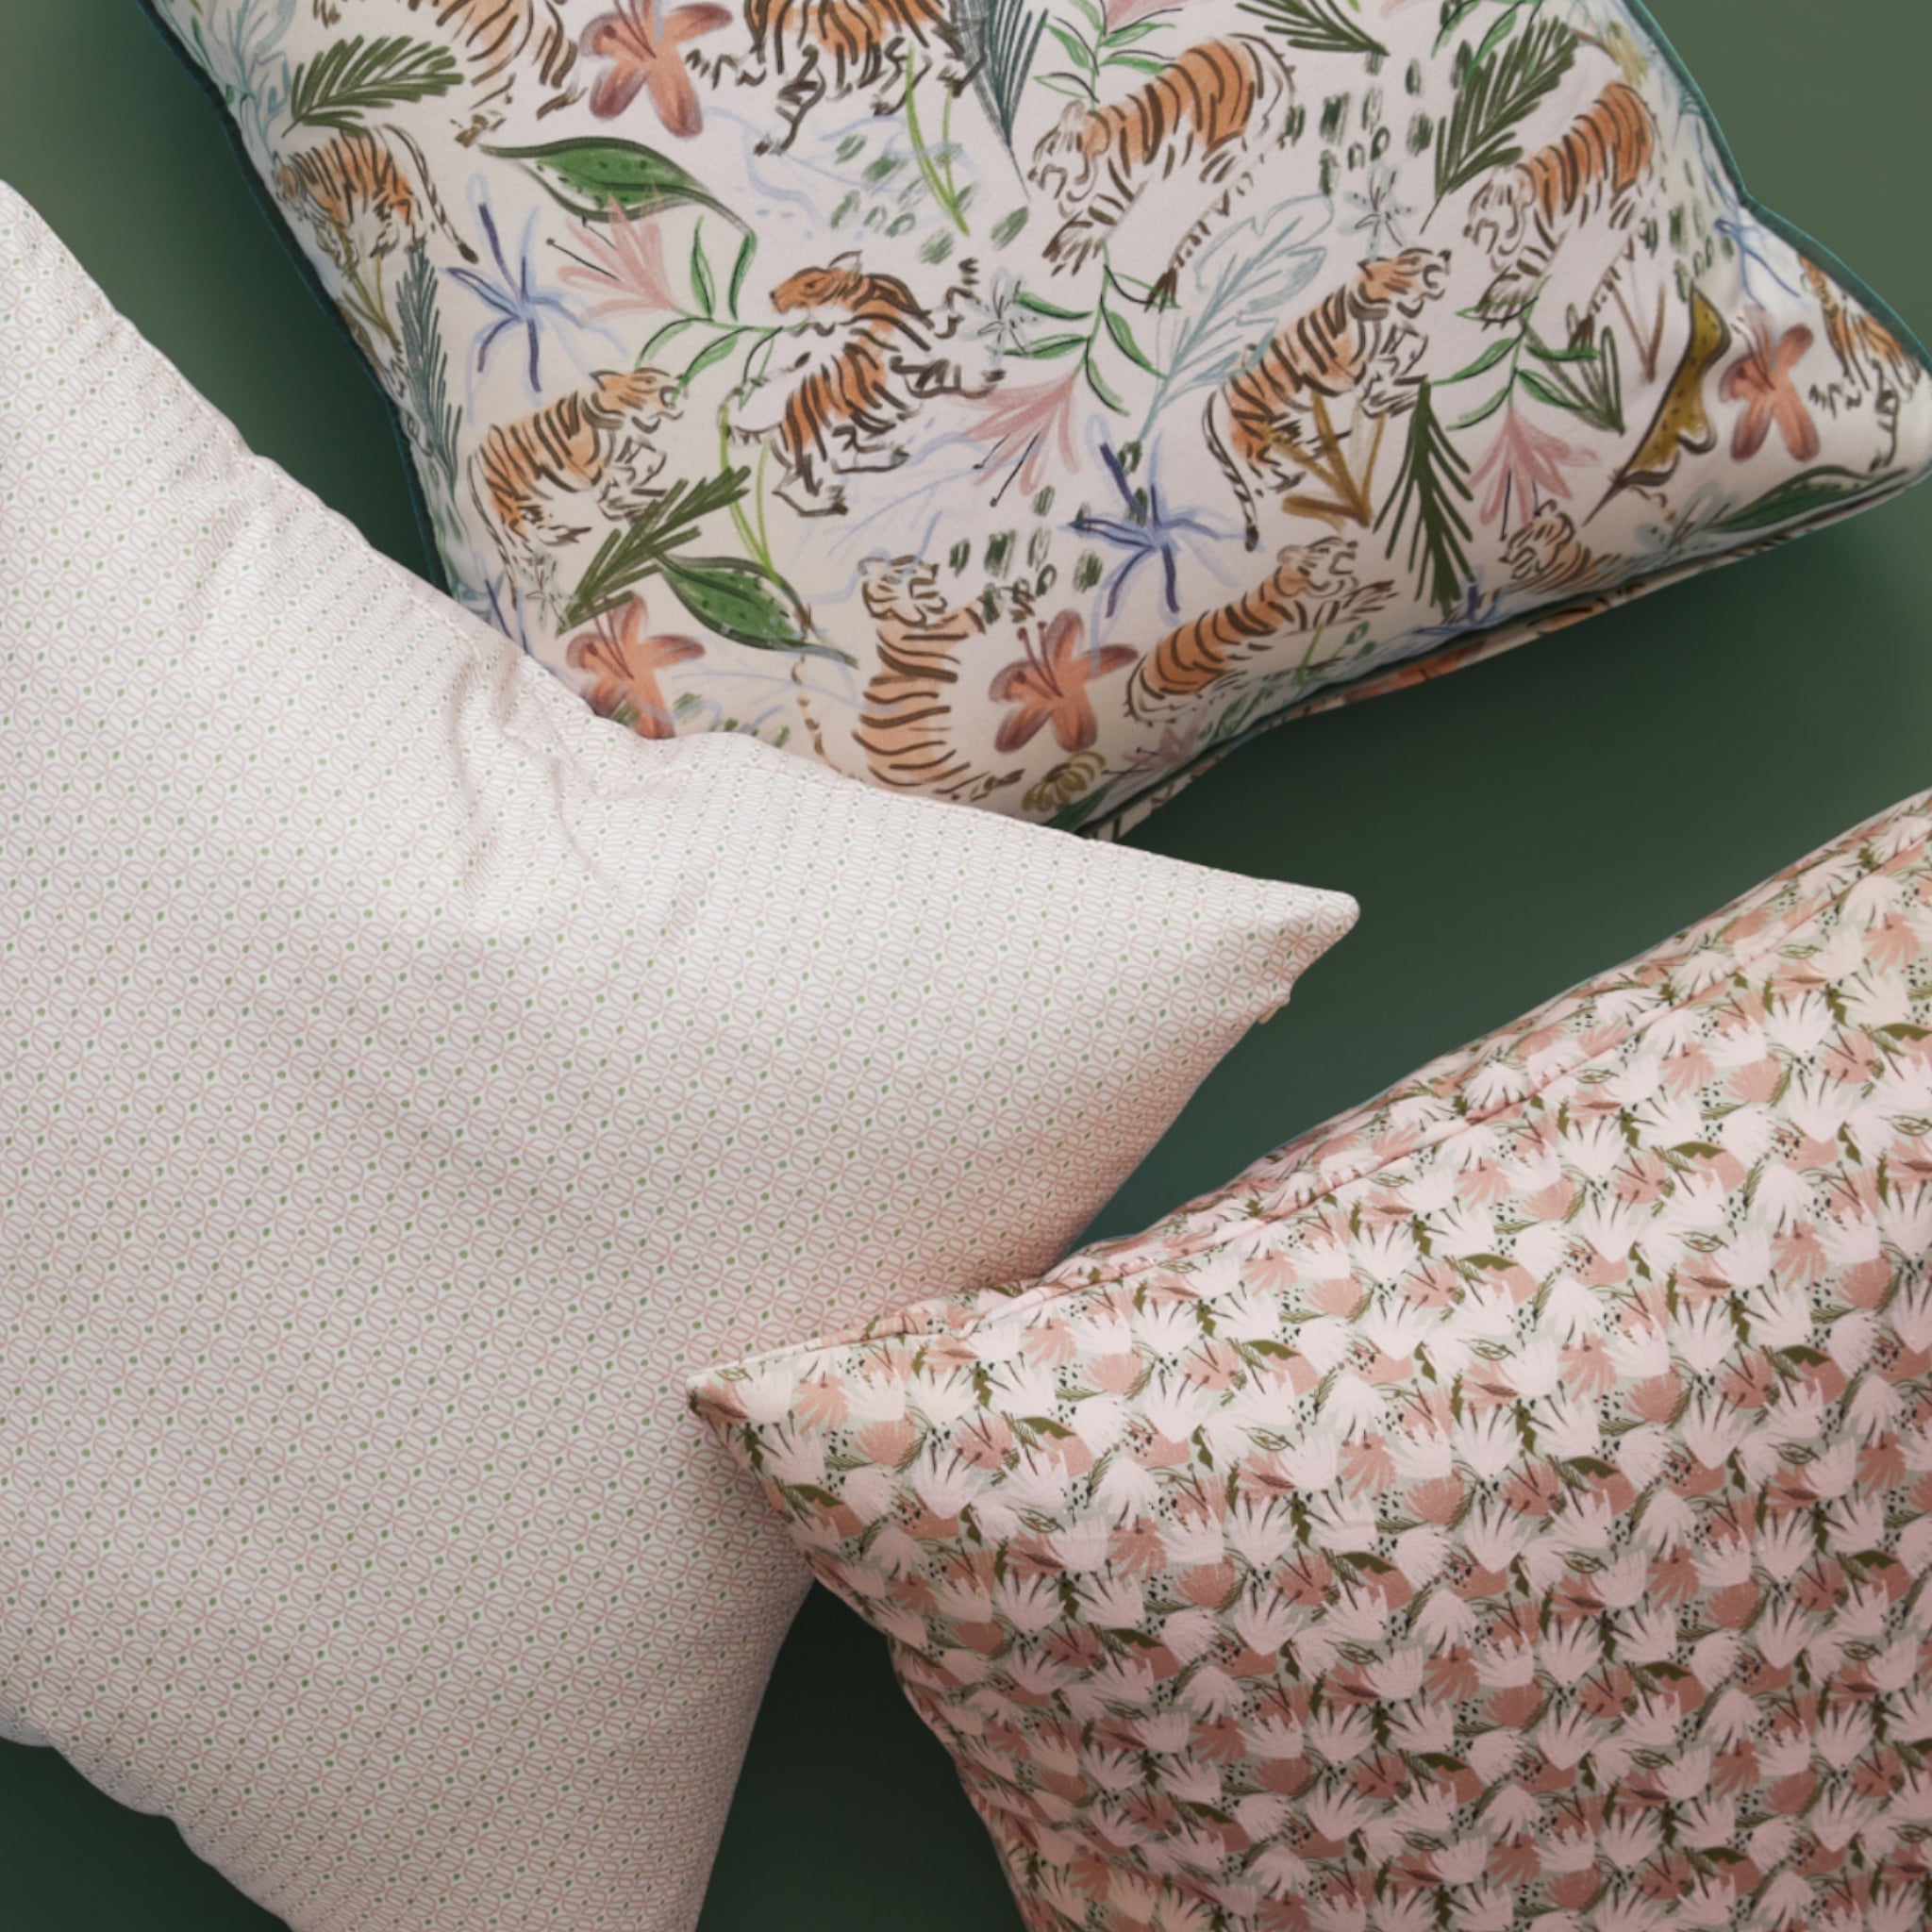 Close-up of Pink Geometric Printed Pillow, Pink Chinoiserie Printed Pillow, and Pink Floral Printed Pillow on fern green background